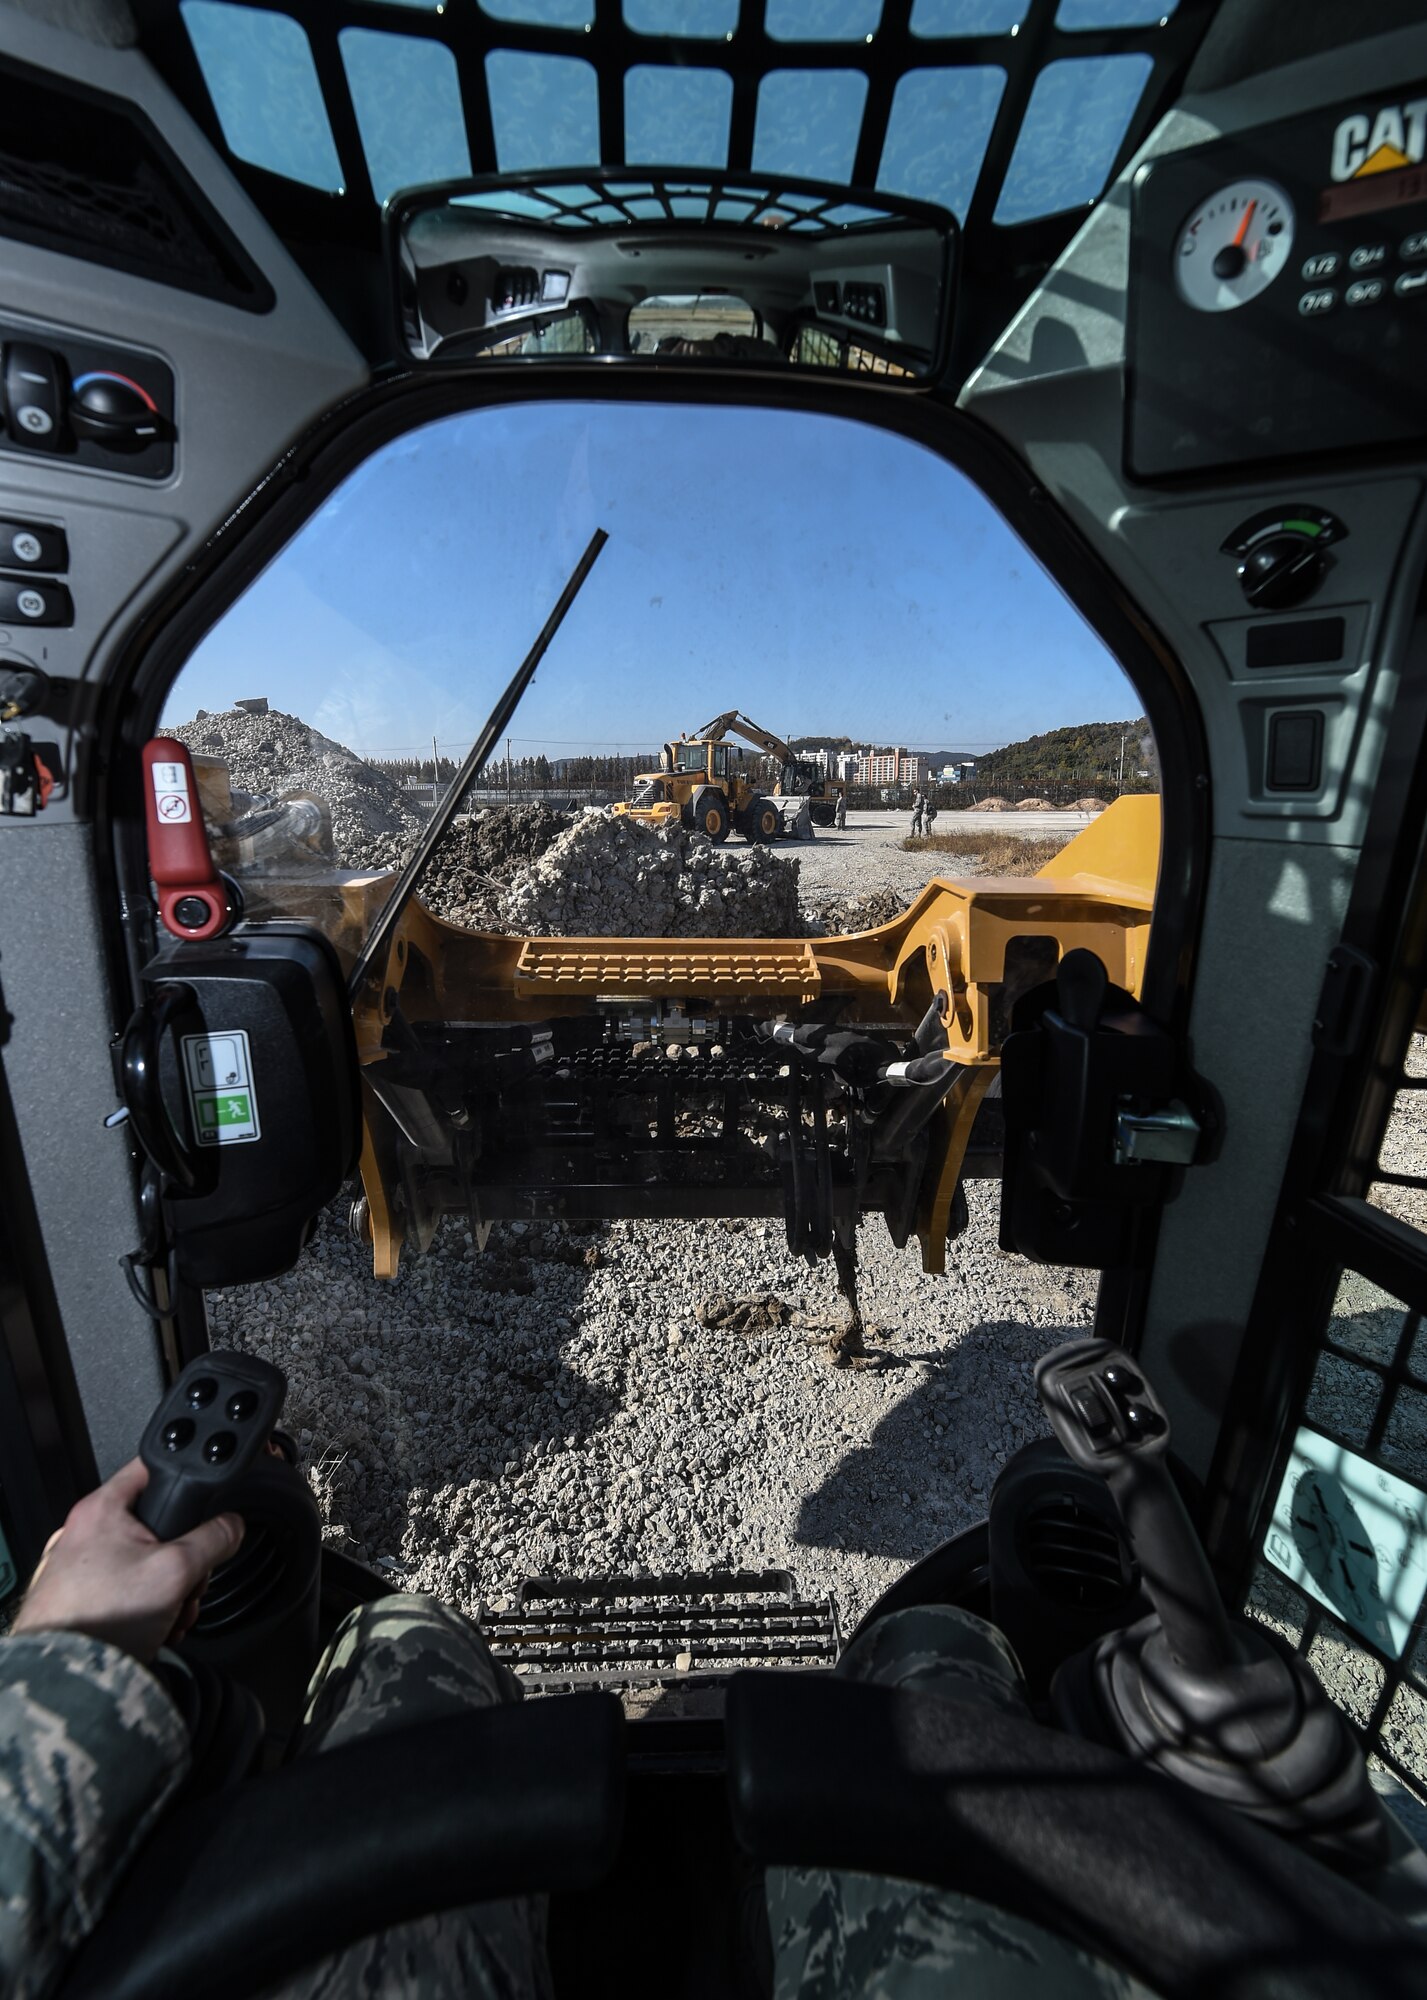 An Airman from the 673d Air Base Wing operates a compact track loader during a Rapid Airfield Damage Repair training exercise at Gwangju Air Base, Republic of Korea., Nov. 9, 2017. Approximately forty U.S. Airmen from Joint Base Elmendorf-Richardson, Alaska, and 40 R.O.K. Airmen trained together for a week to learn a new runway repair process for wartime contingencies. The bilateral training exercise enhanced interoperability and strengthen partnerships in the Indo-Asia Pacific region. (U.S. Air Force photo by Senior Airman Curt Beach)